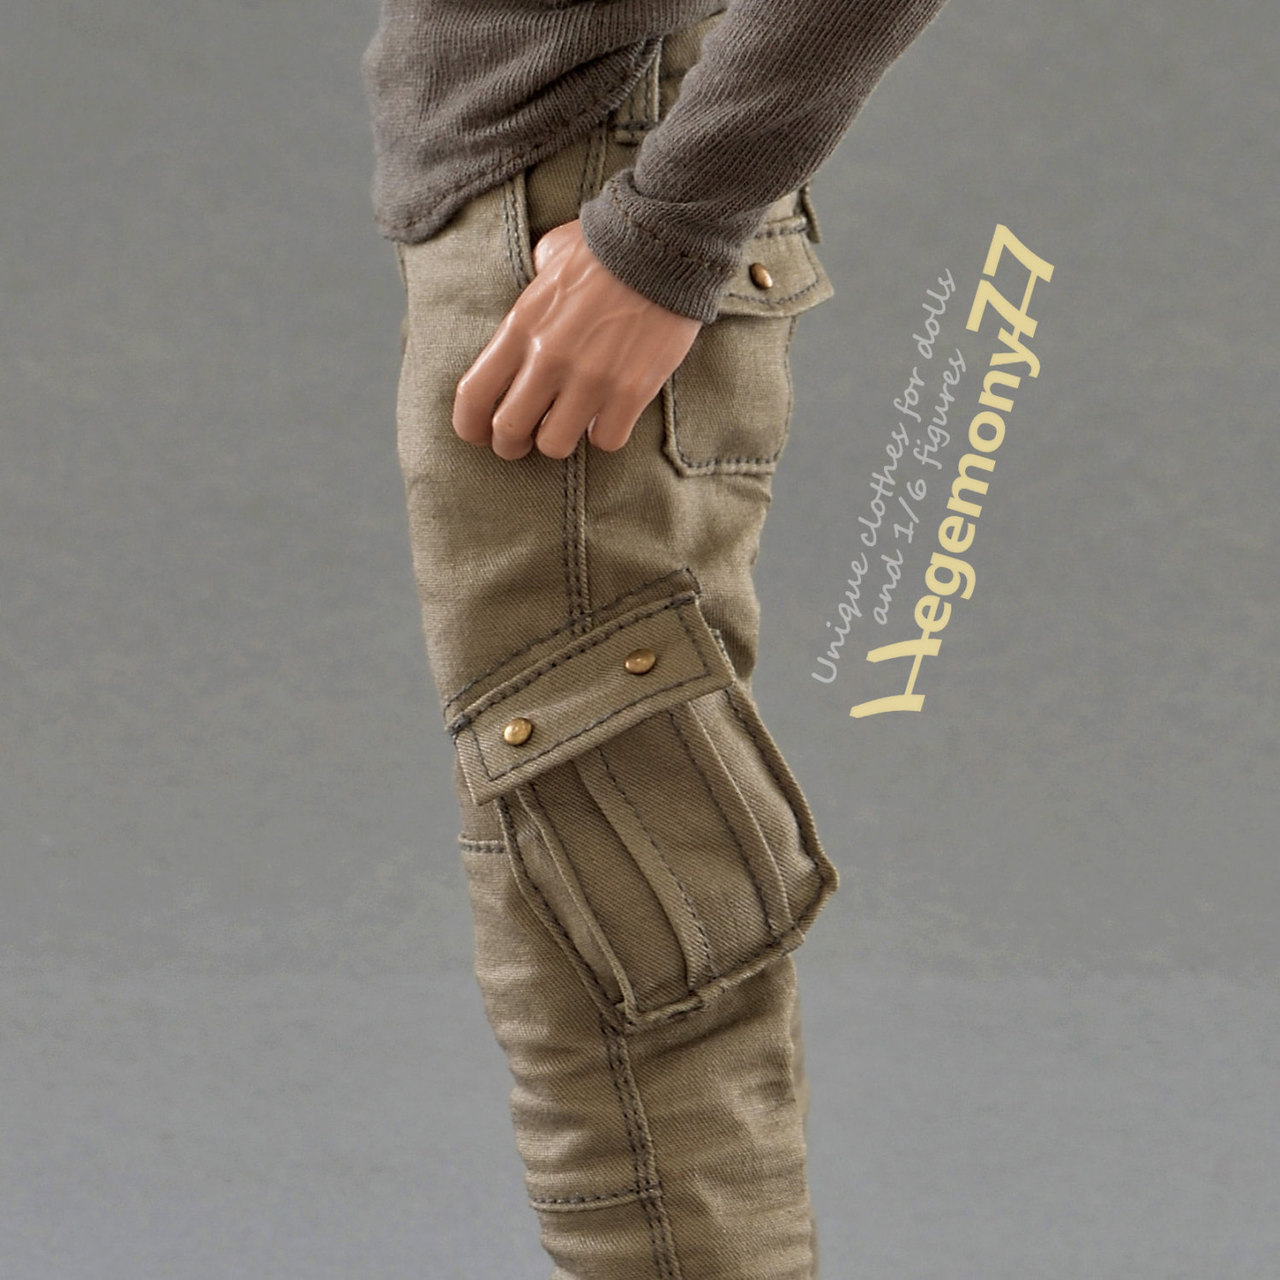 1 6 scale Dexter henley and cargo pants upgraded   Buy onesixth scale  clothes made by Hegemony77